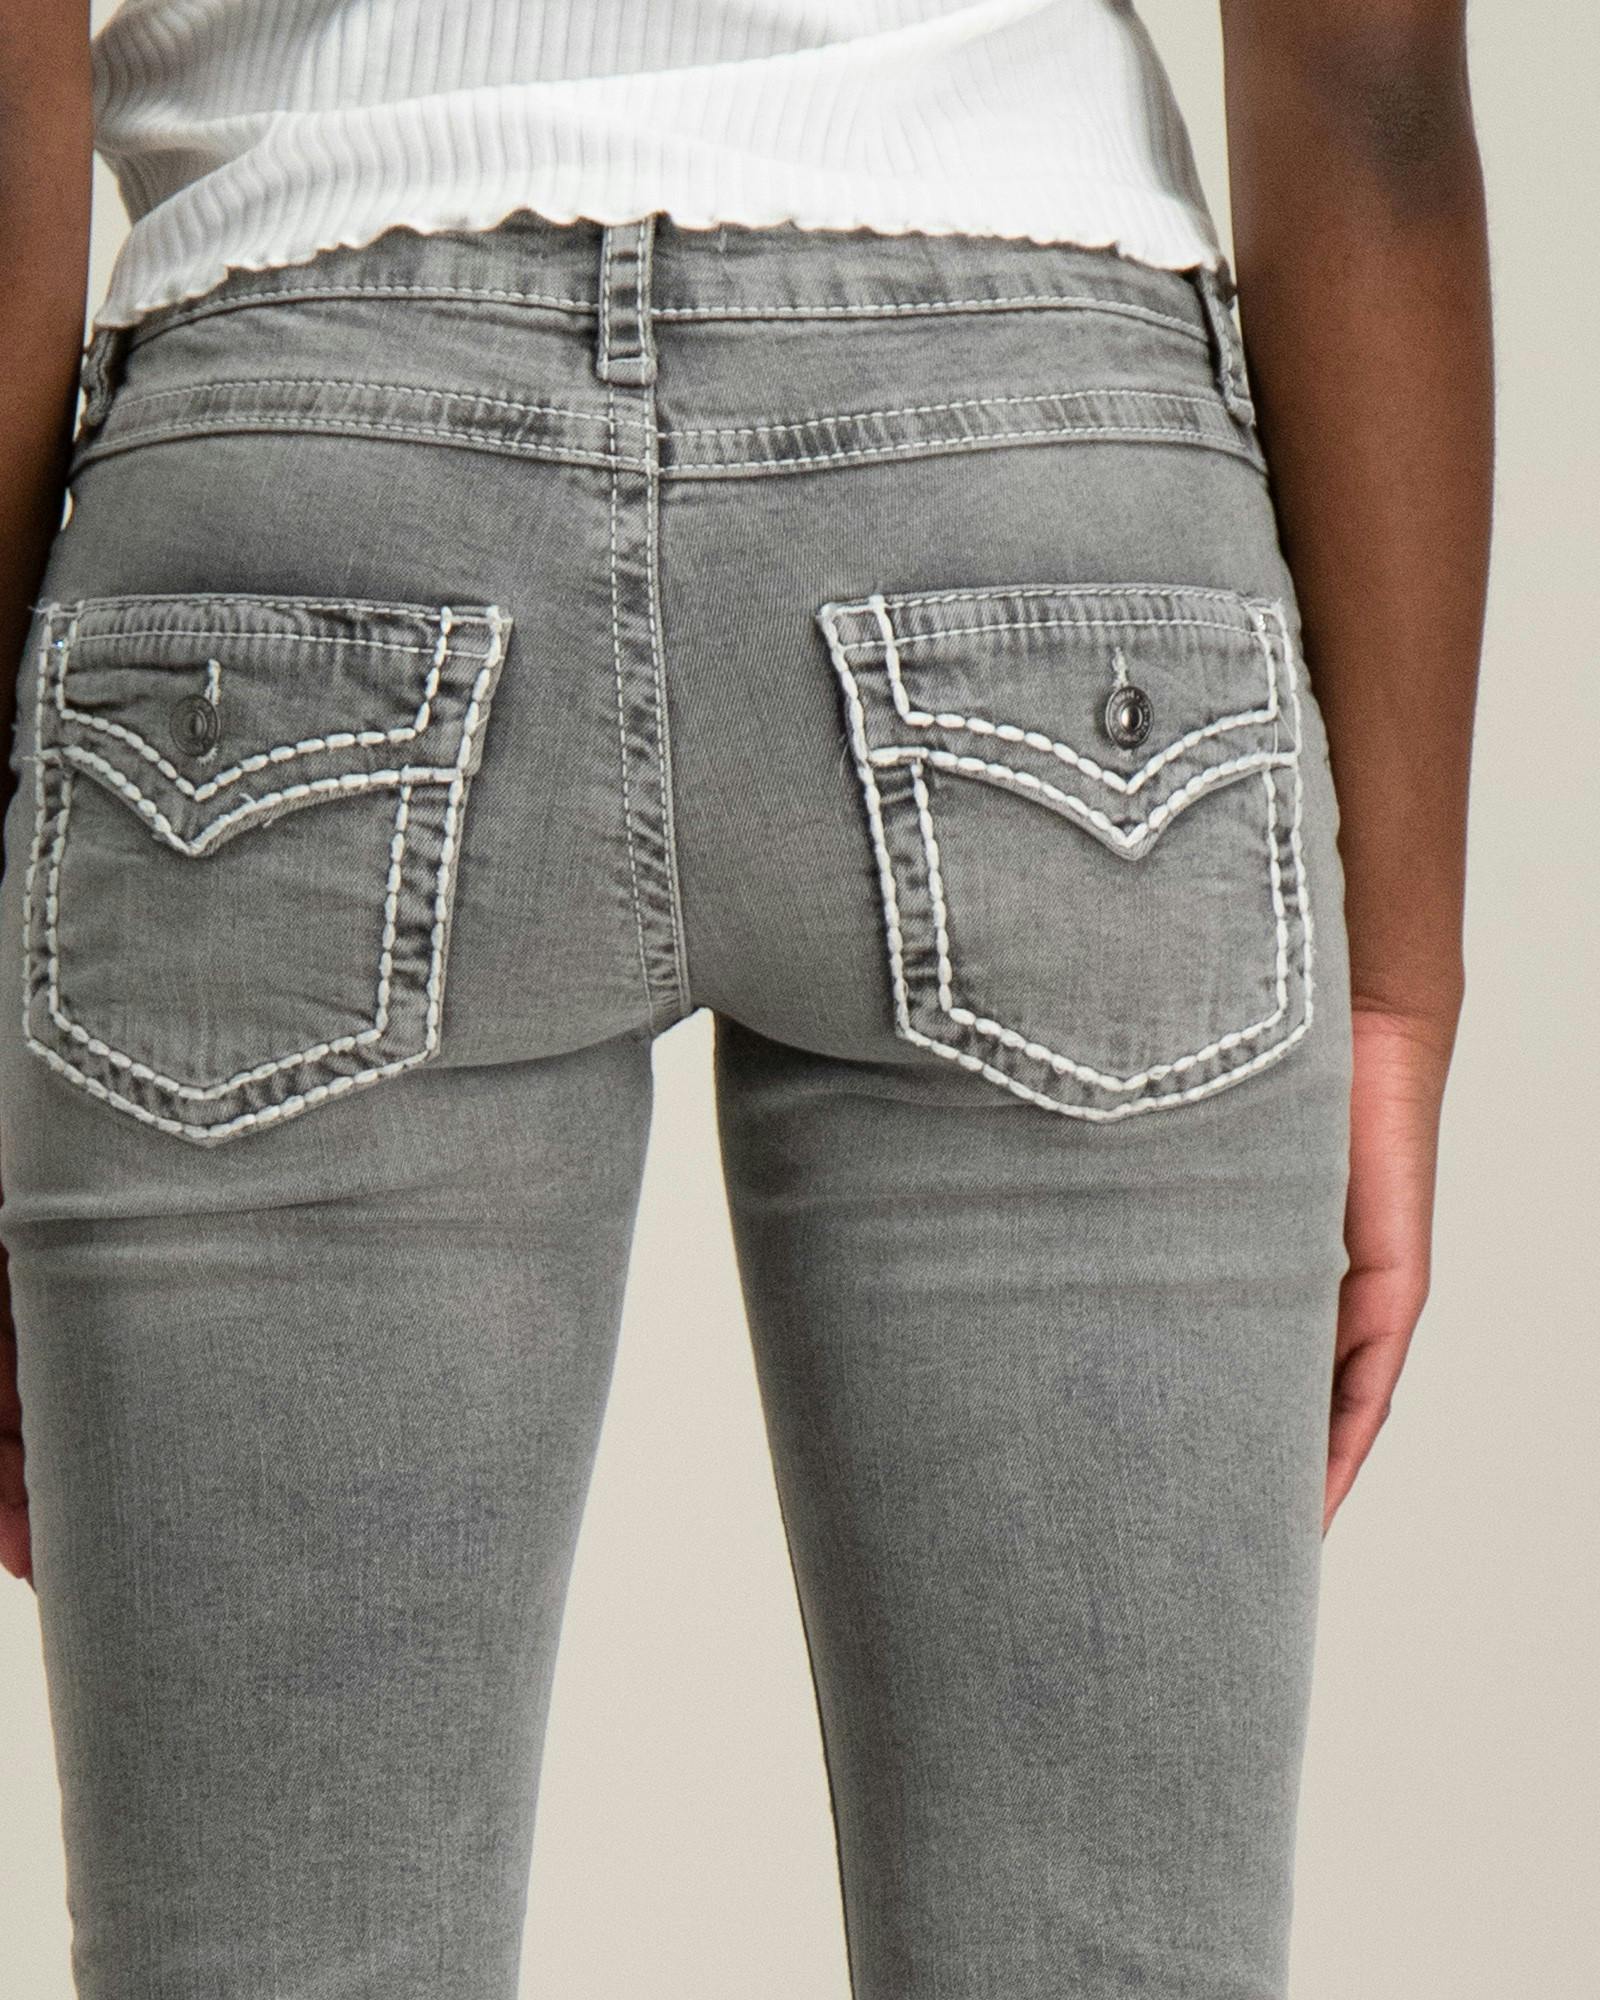 Low boot embroidery jeans